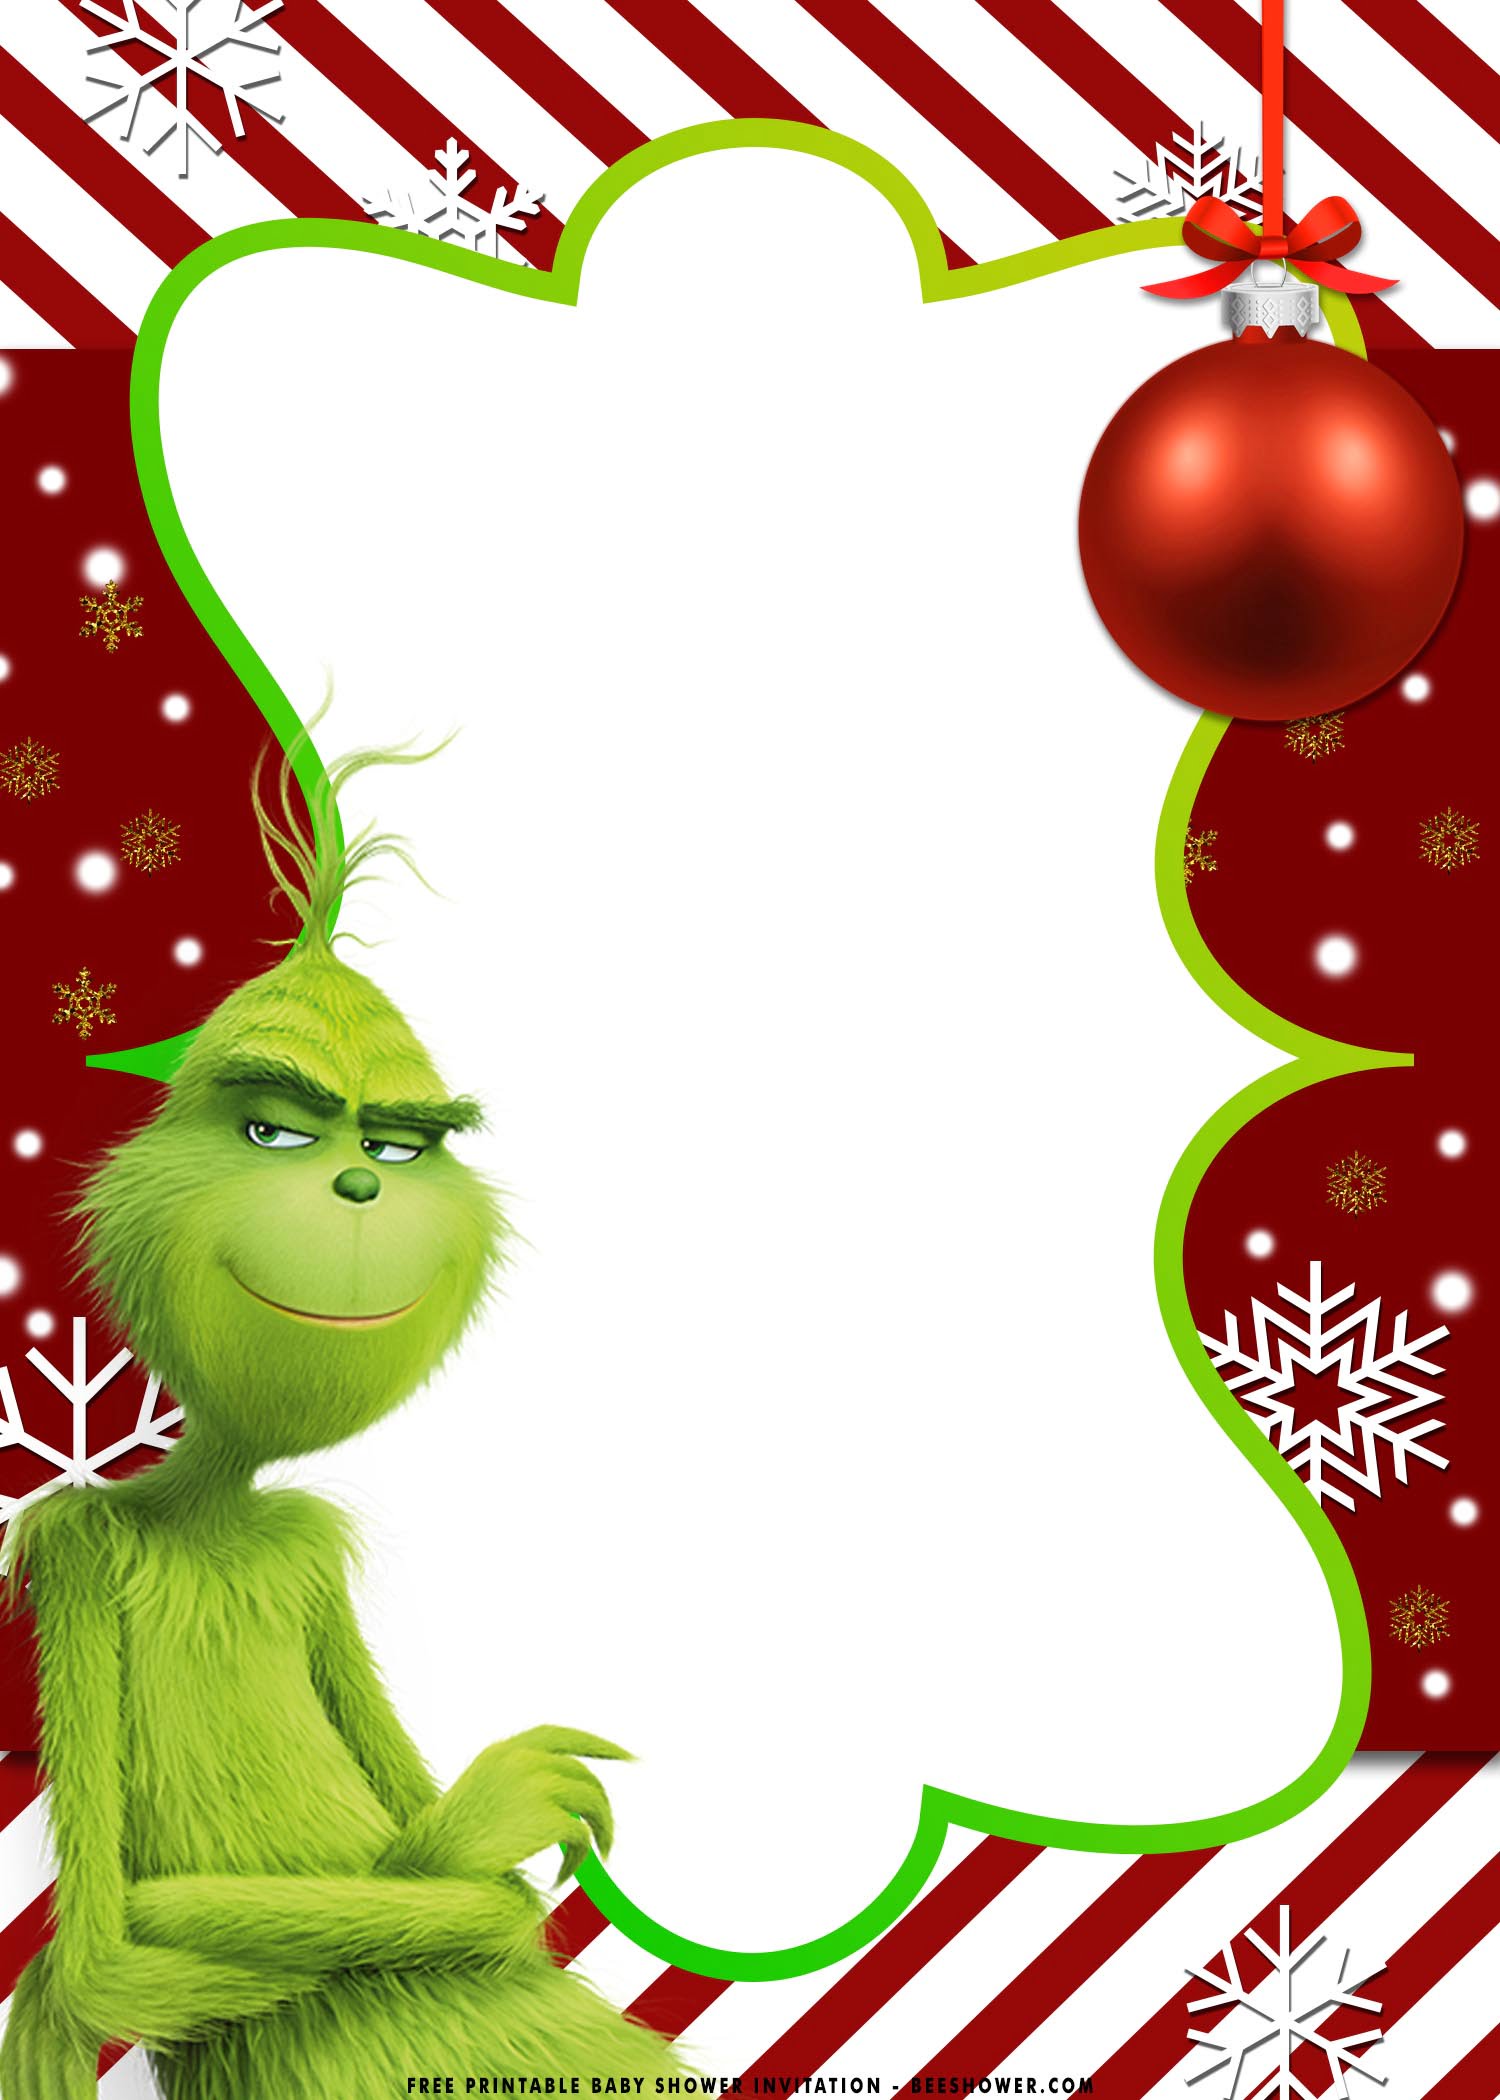 Free Printable Grinch Baby Shower Invitation Templates With Red Stripes and...